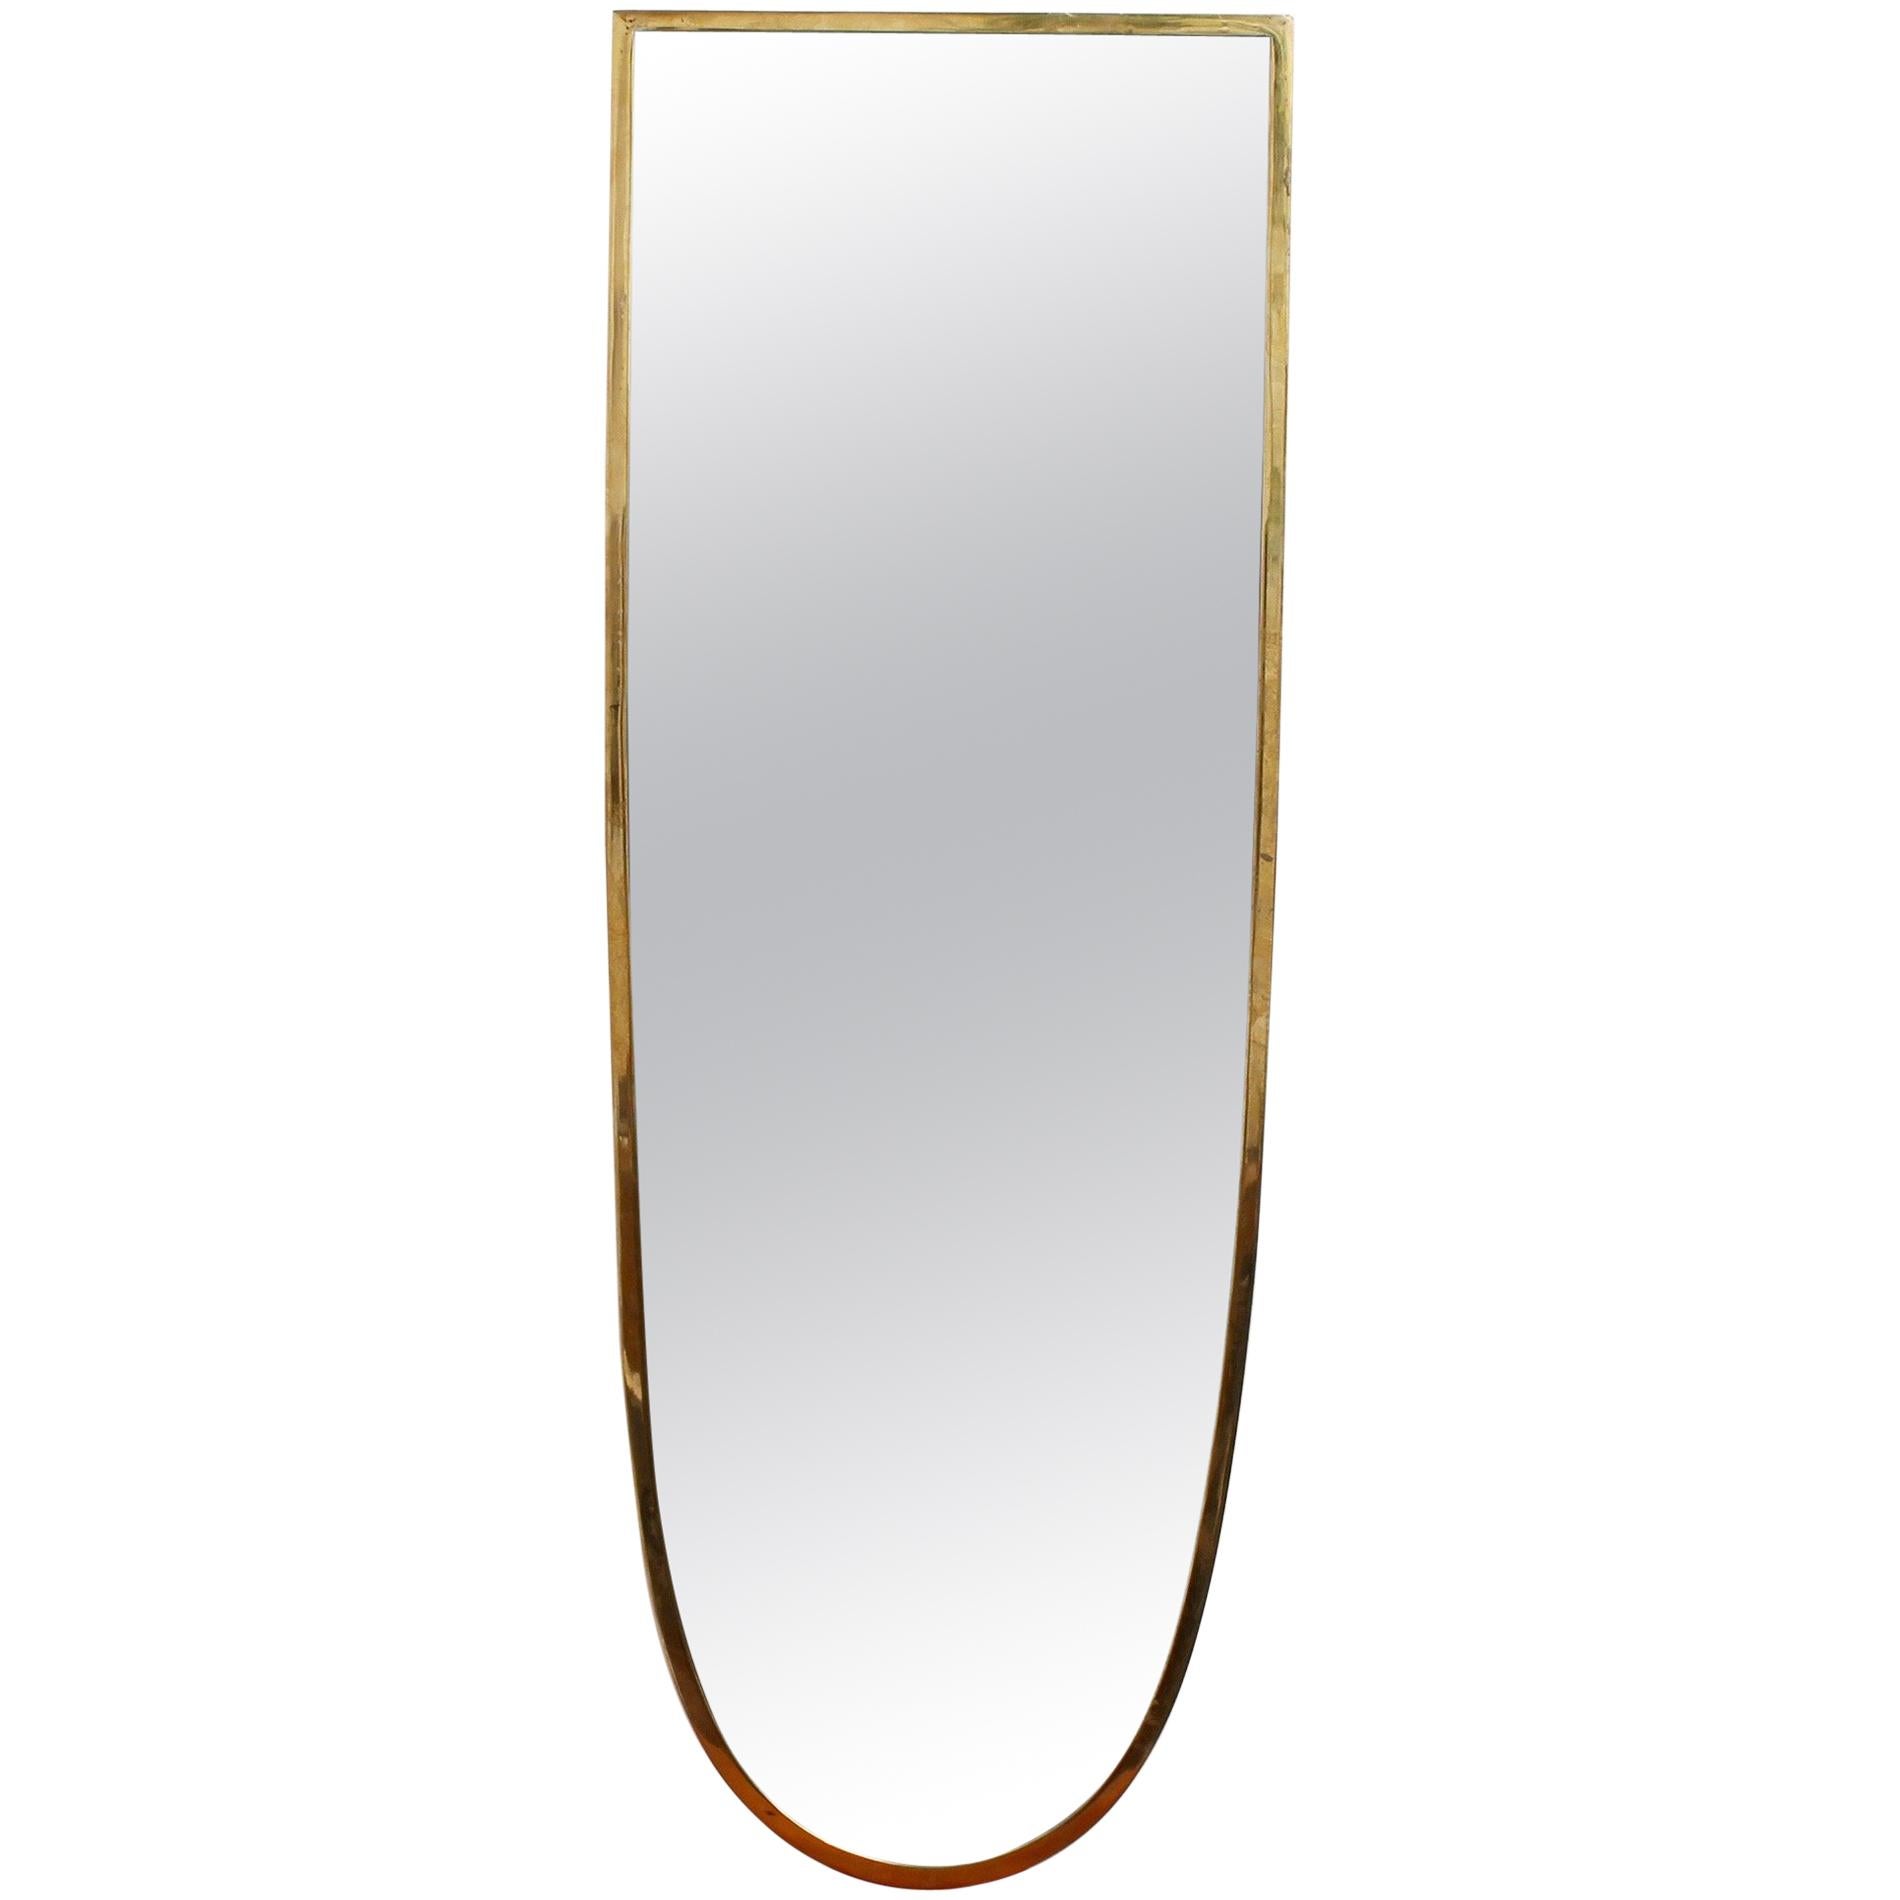 Midcentury Italian Wall Mirror with Brass Frame, circa 1950s For Sale